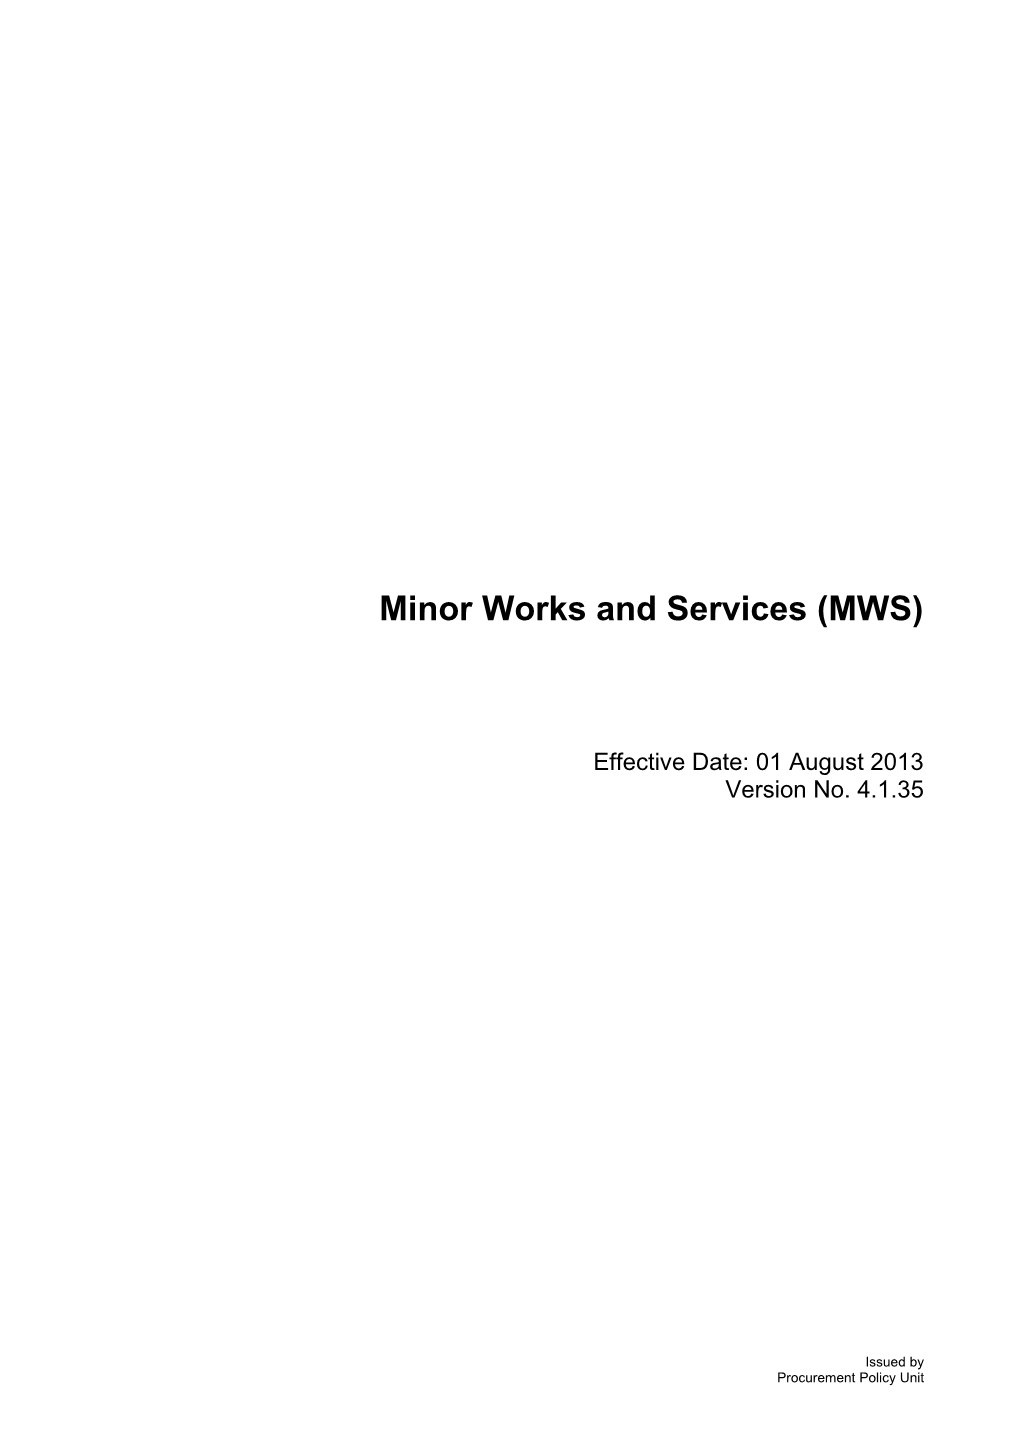 Conditions: Tendering and Contract MWS - (V 4.1.35) (01 August 2013)